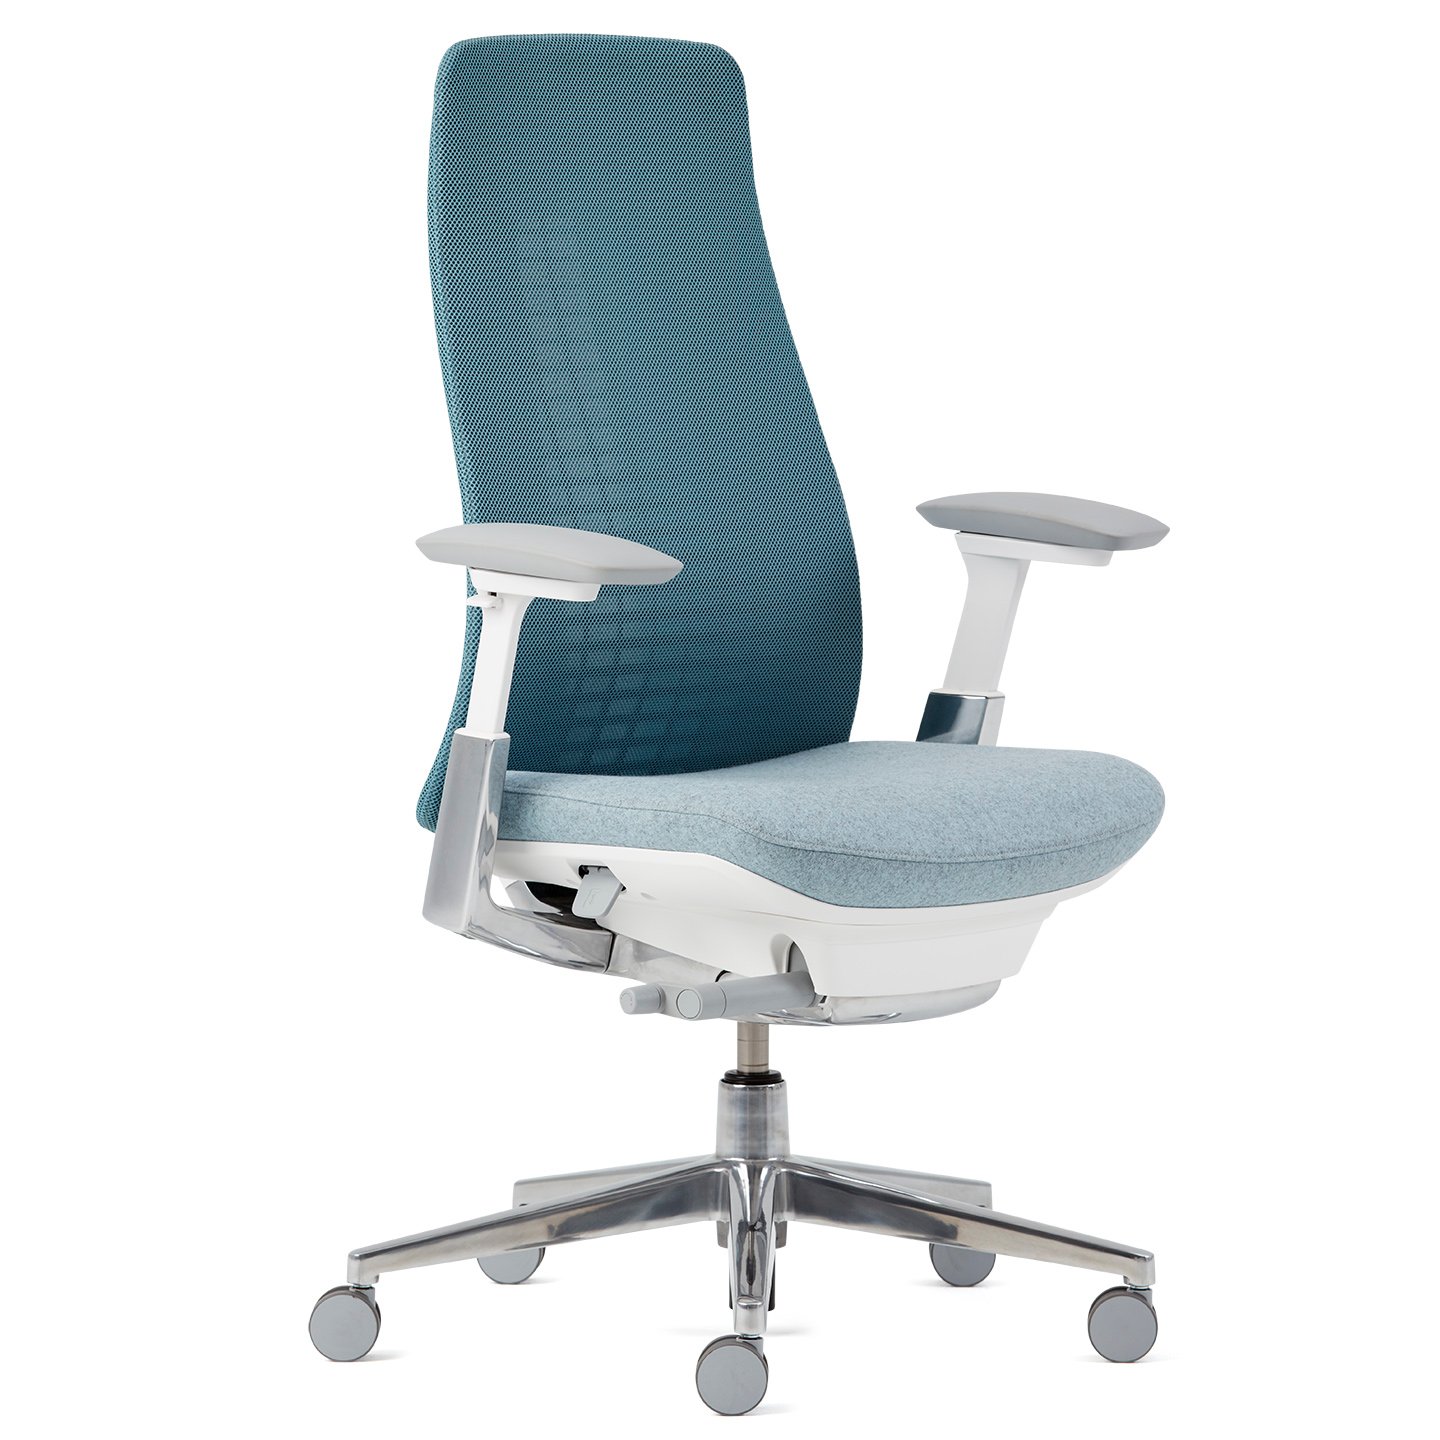 The Best 5 Ergonomic Chairs in Malaysia